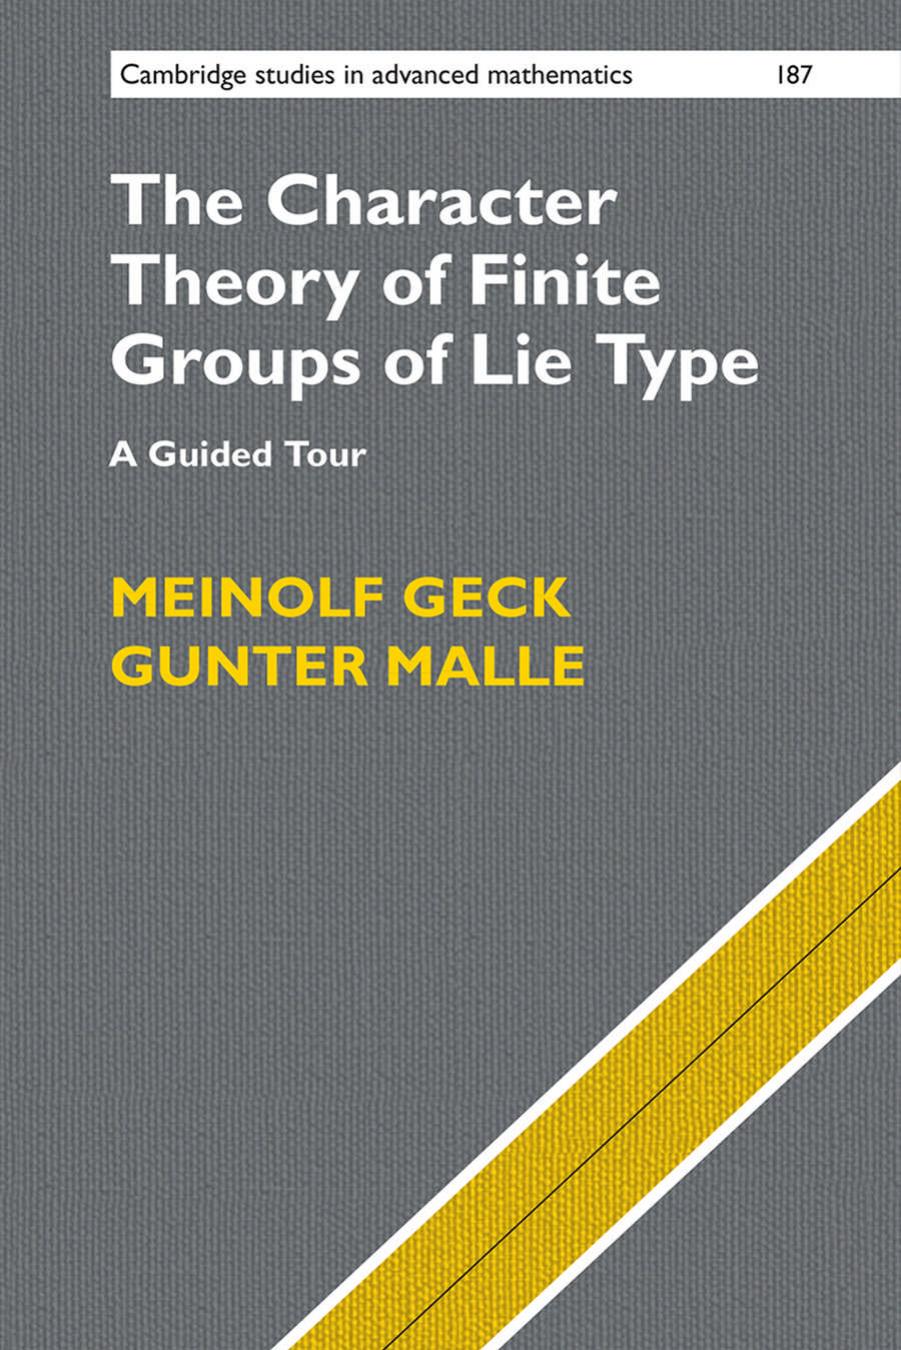 The Character Theory of Finite Groups of Lie Type: A Guided Tour